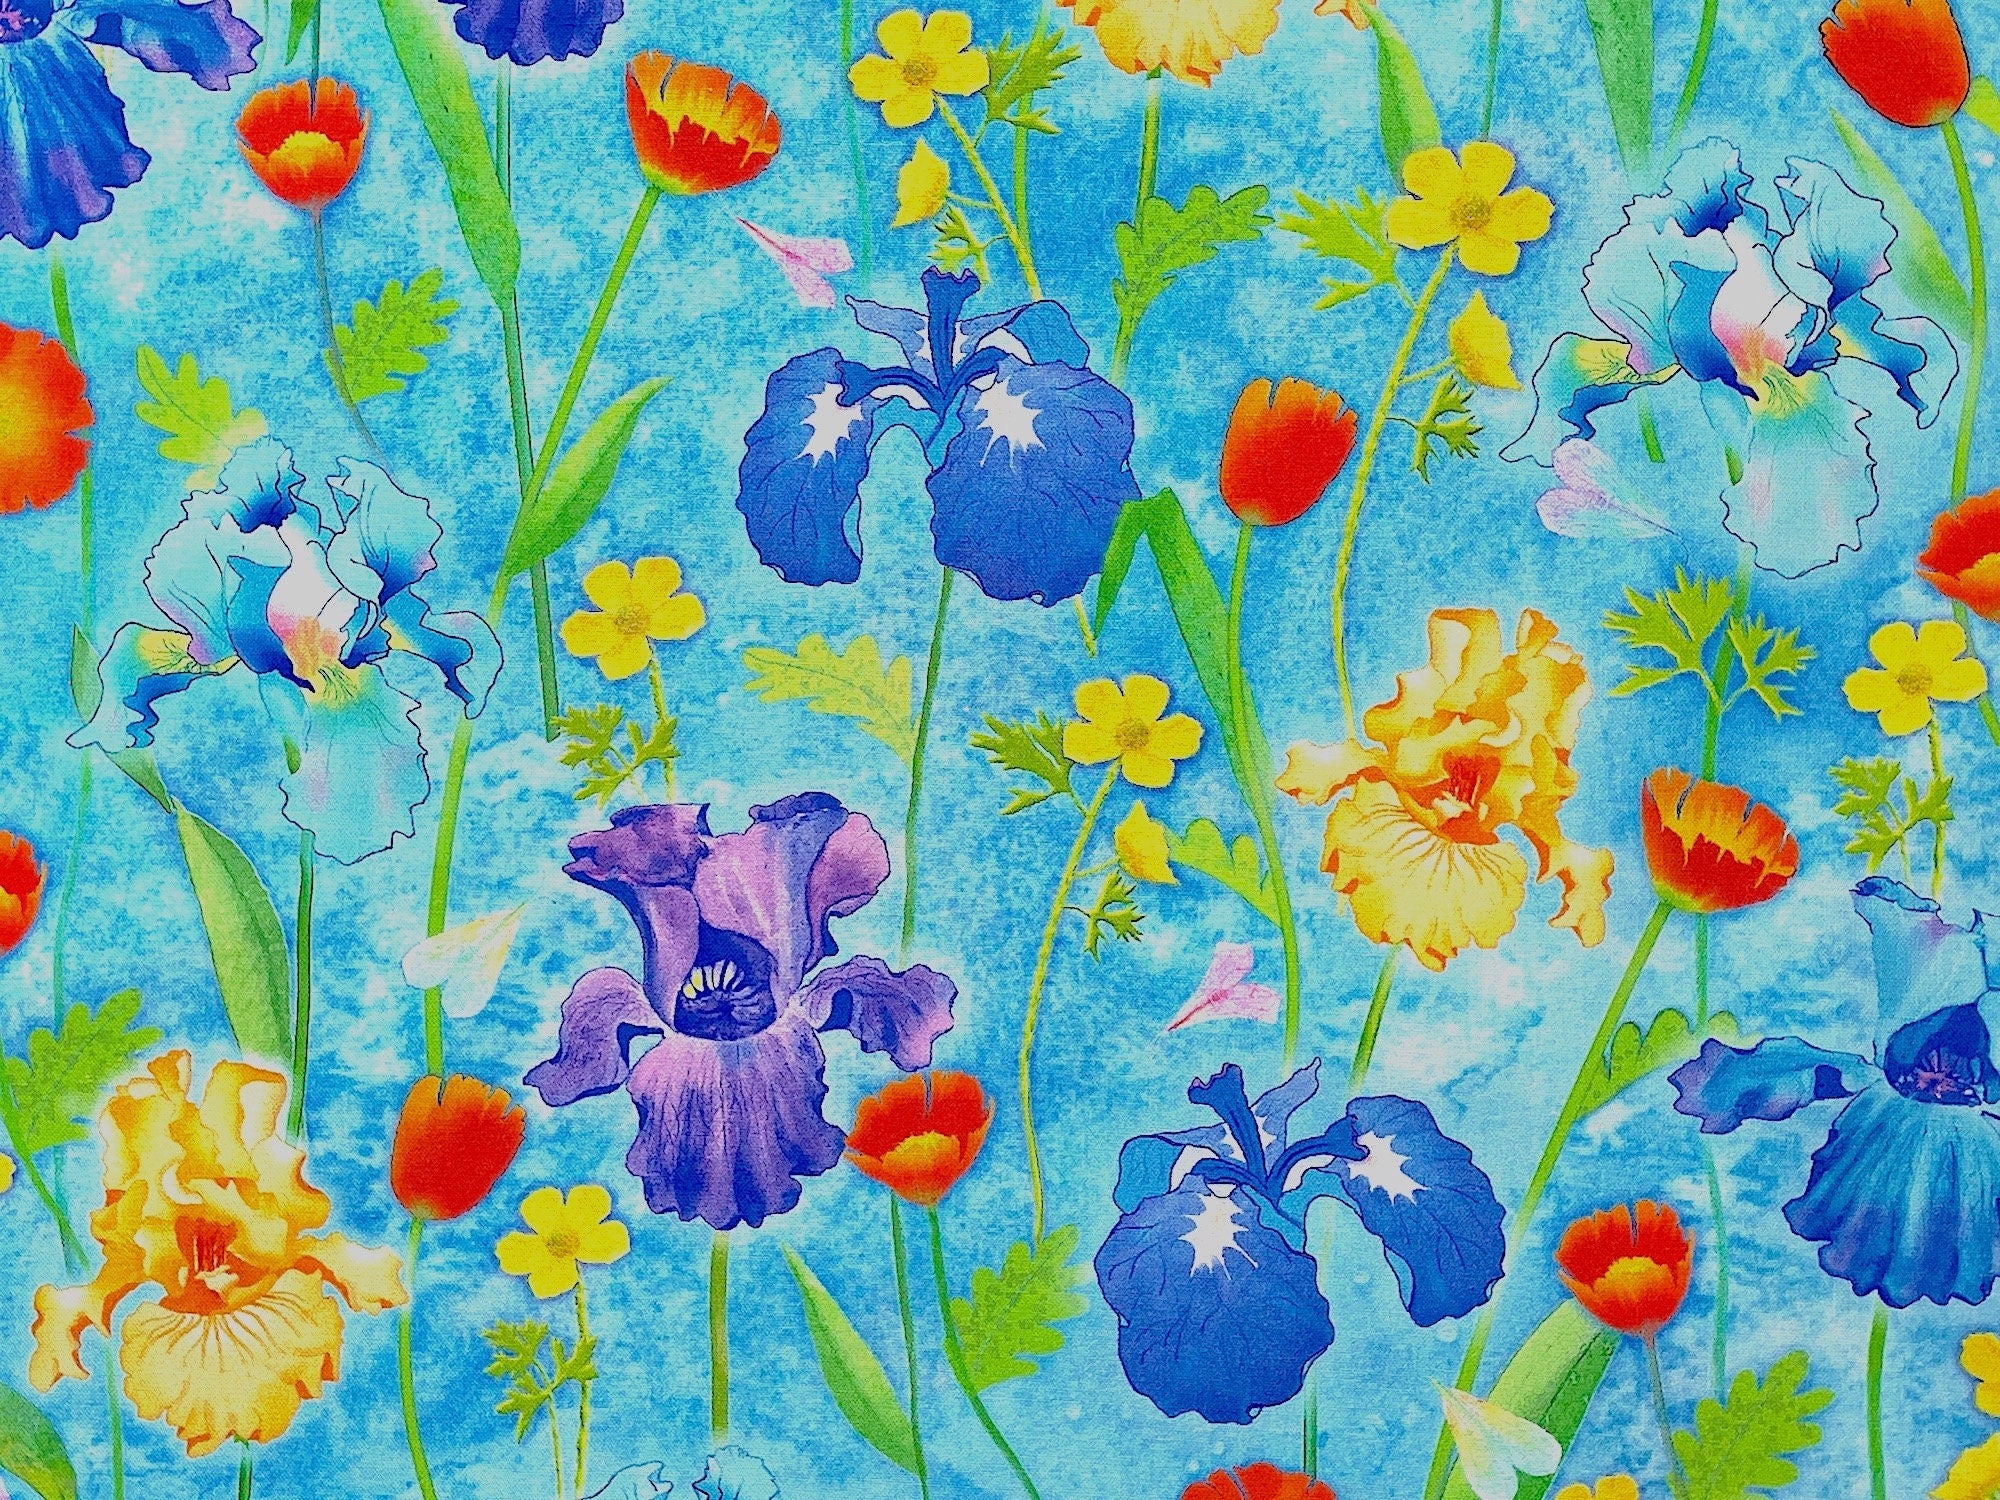 Aqua fabric covered with blue, yellow and purple iris and poppies.